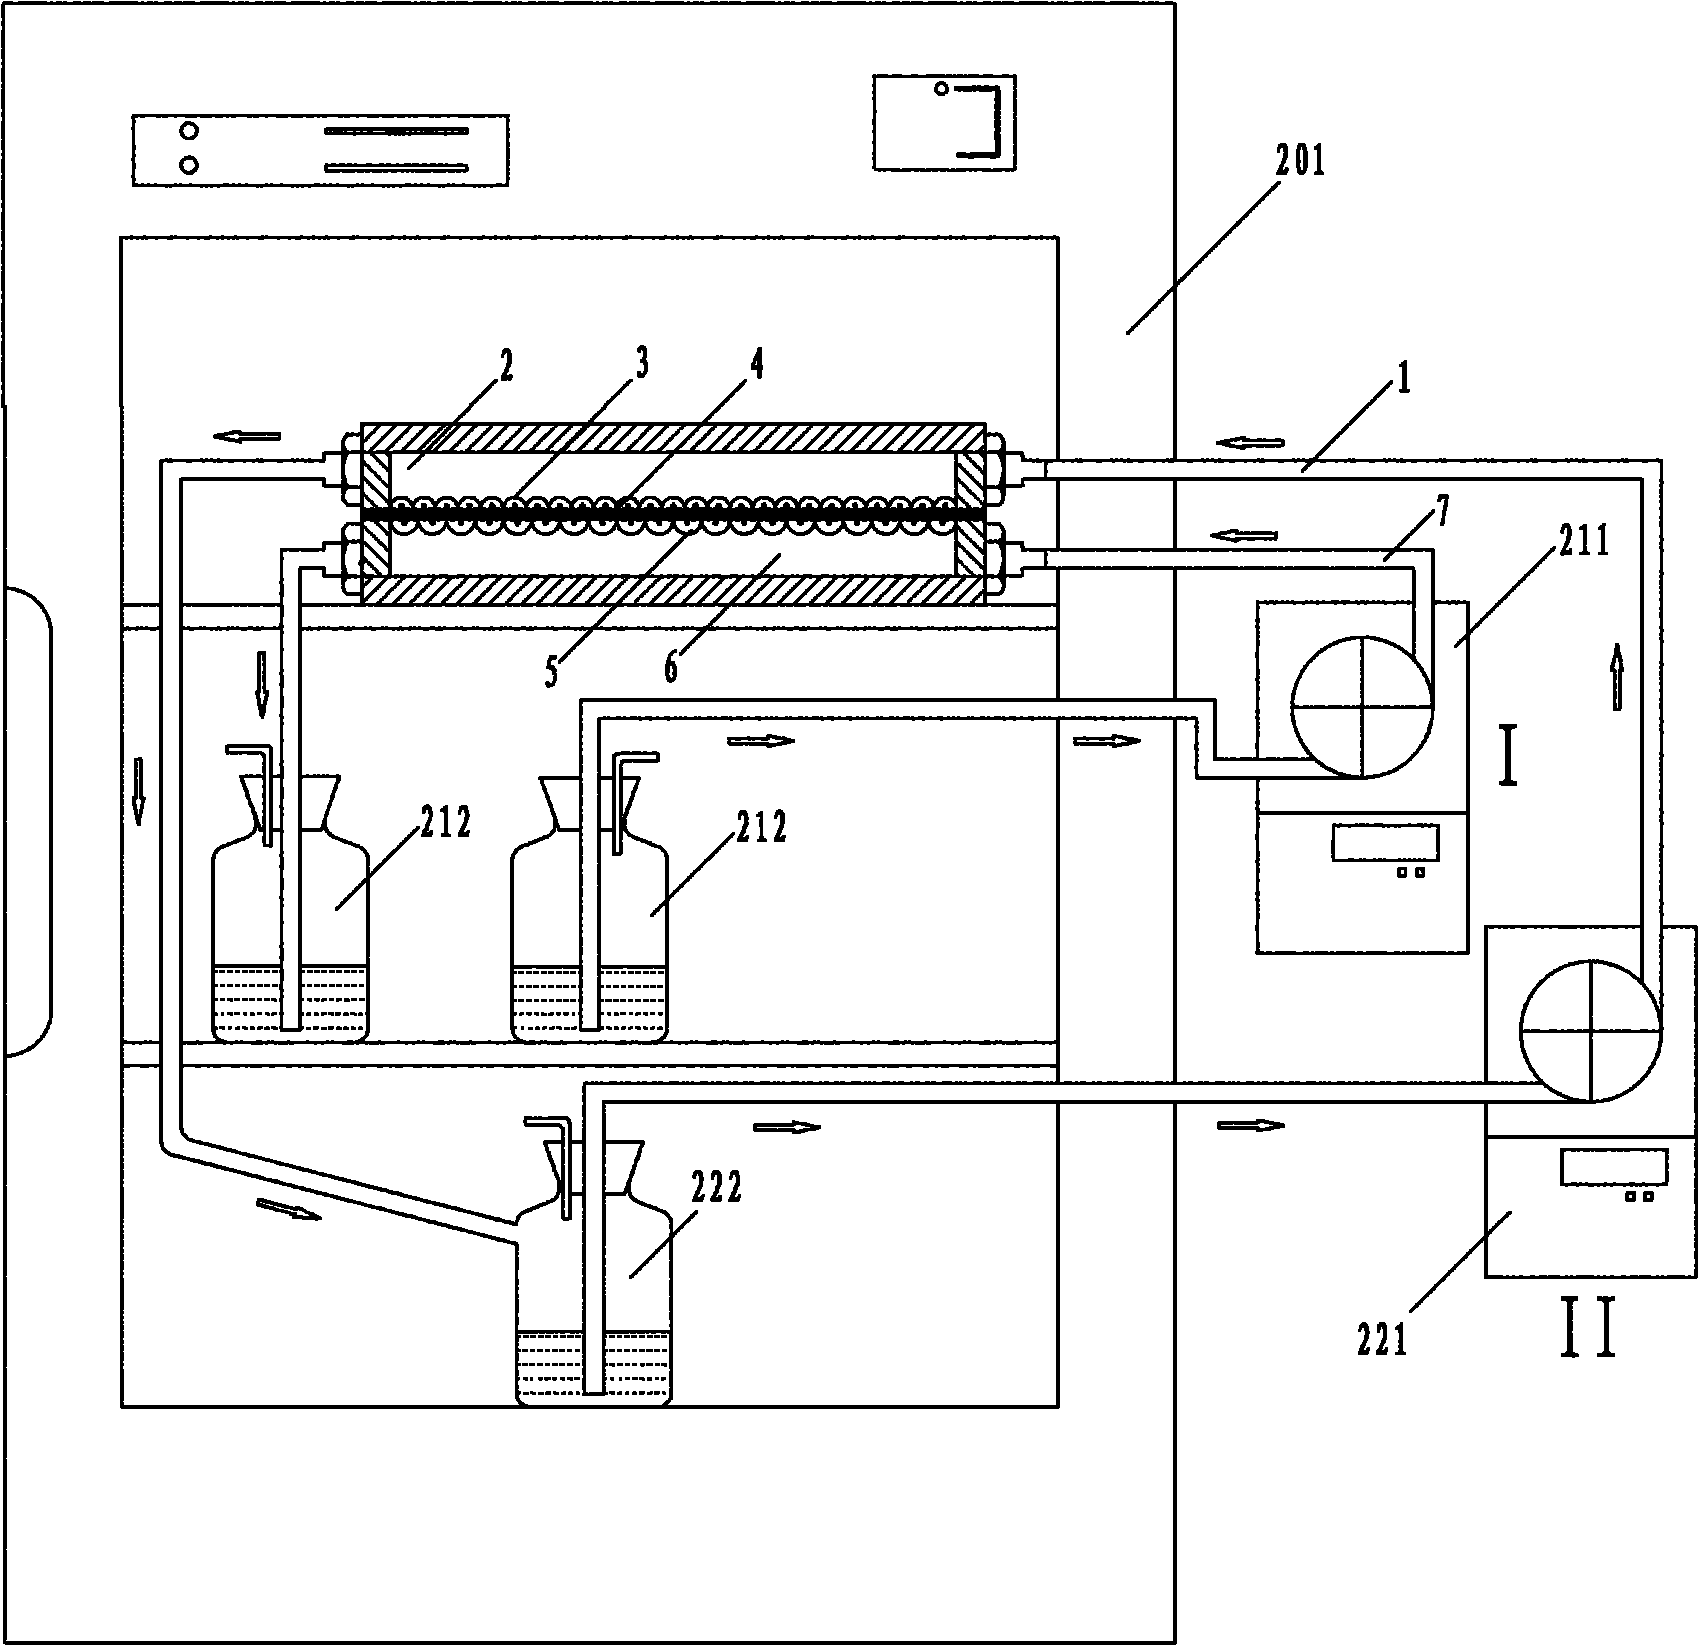 Mechanical loading flow chamber device for co-culturing in-vitro cells